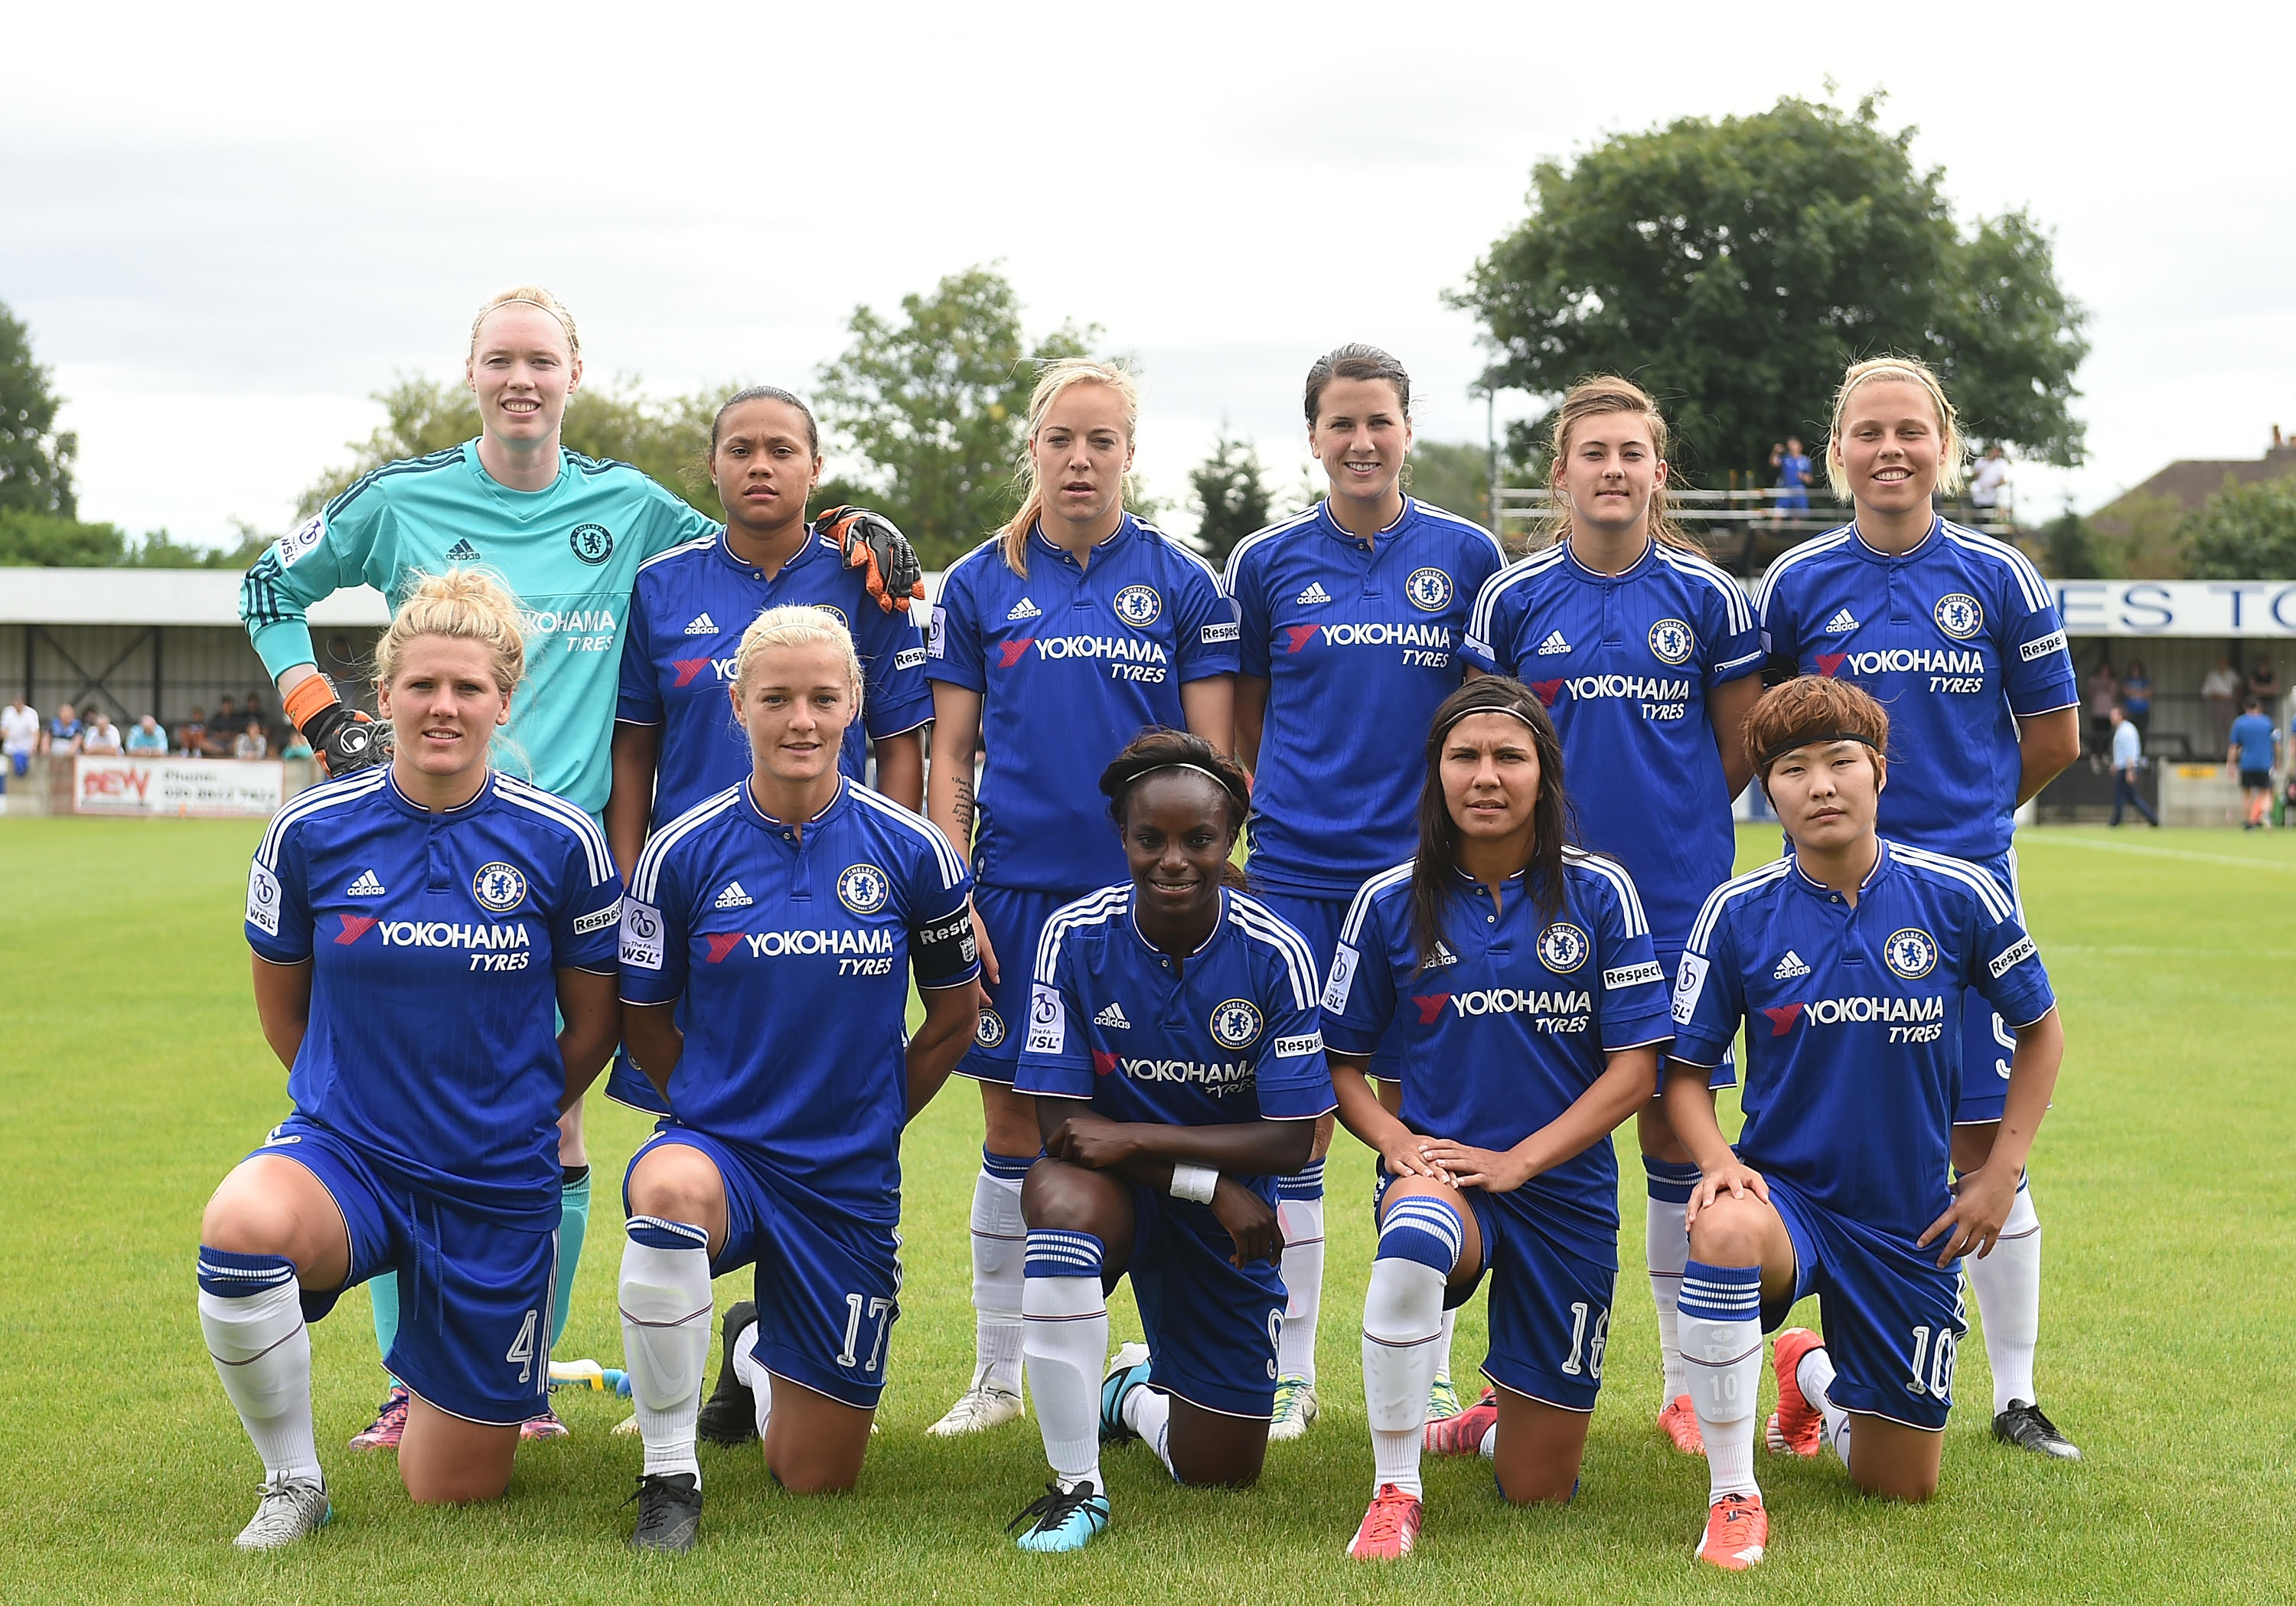 STAINES, ENGLAND - AUGUST 09: Team of Chelsea Ladies FC pose for photos during the FA Women's Super League match between Chelsea Ladies FC and Birmingham City Ladies at Wheatsheaf Lane on August 09, 2015 in Staines, England. (Photo by Tom Dulat - The FA/The FA via Getty Images)